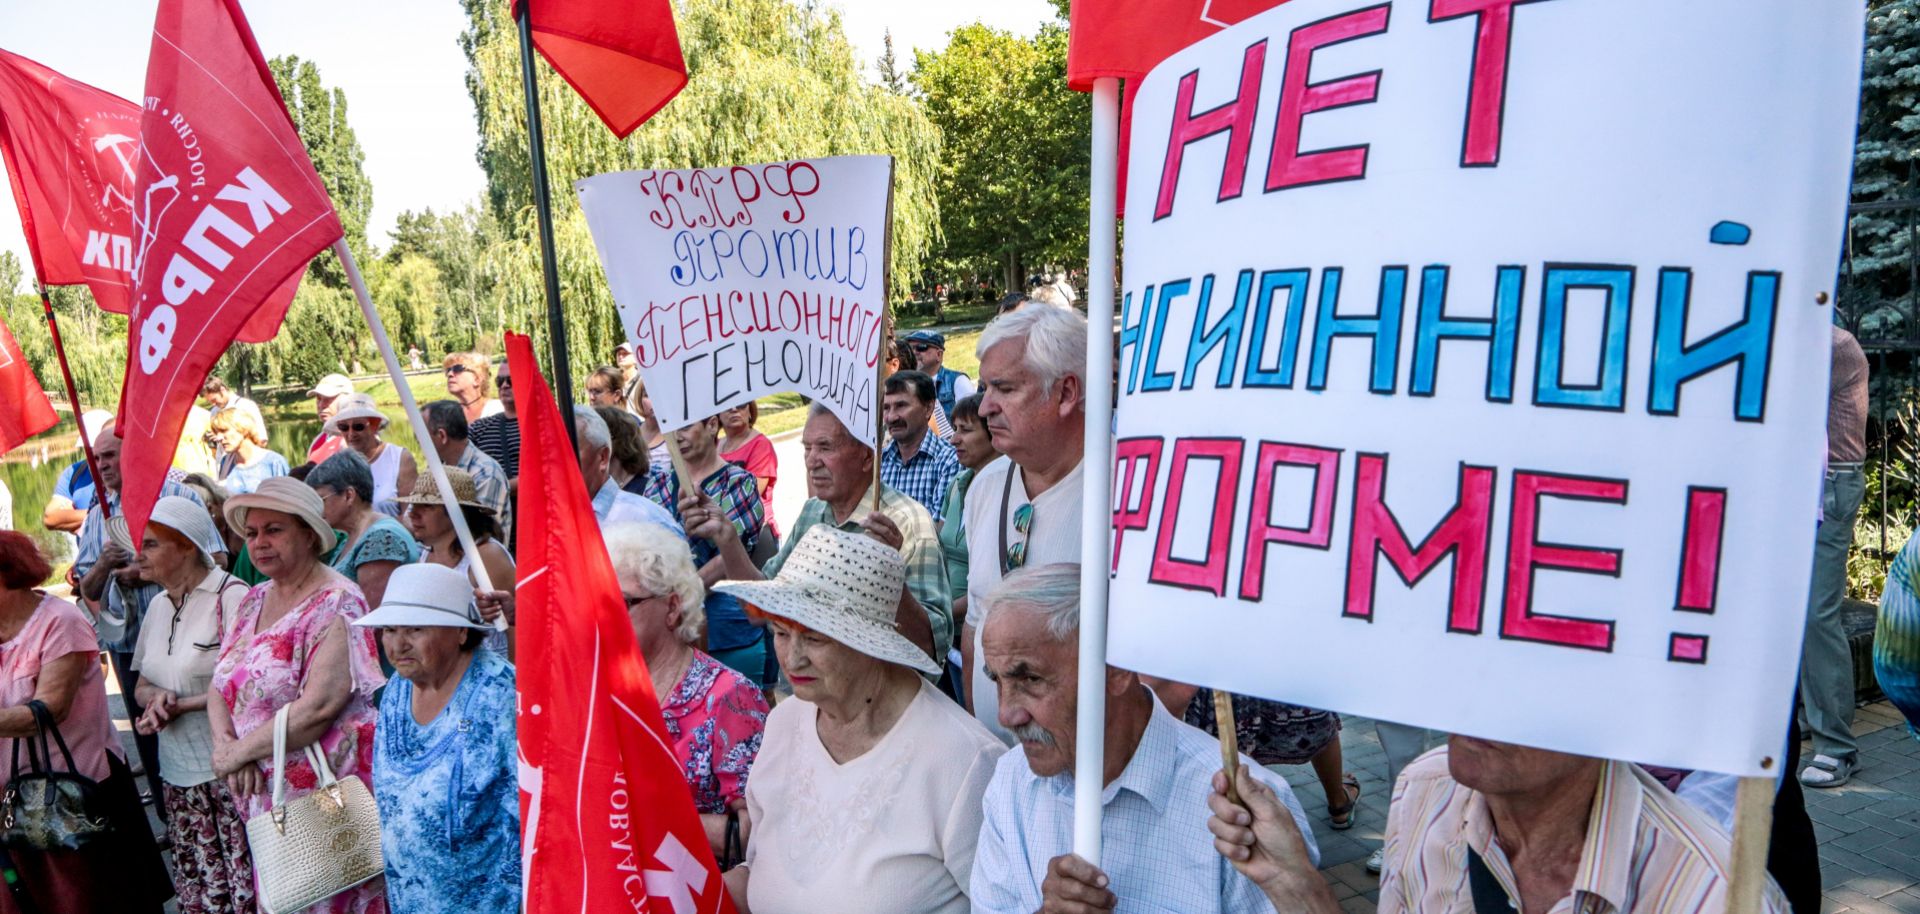 This photo shows protesters rallying against the Russian government's proposal to raise the country's official retirement age.